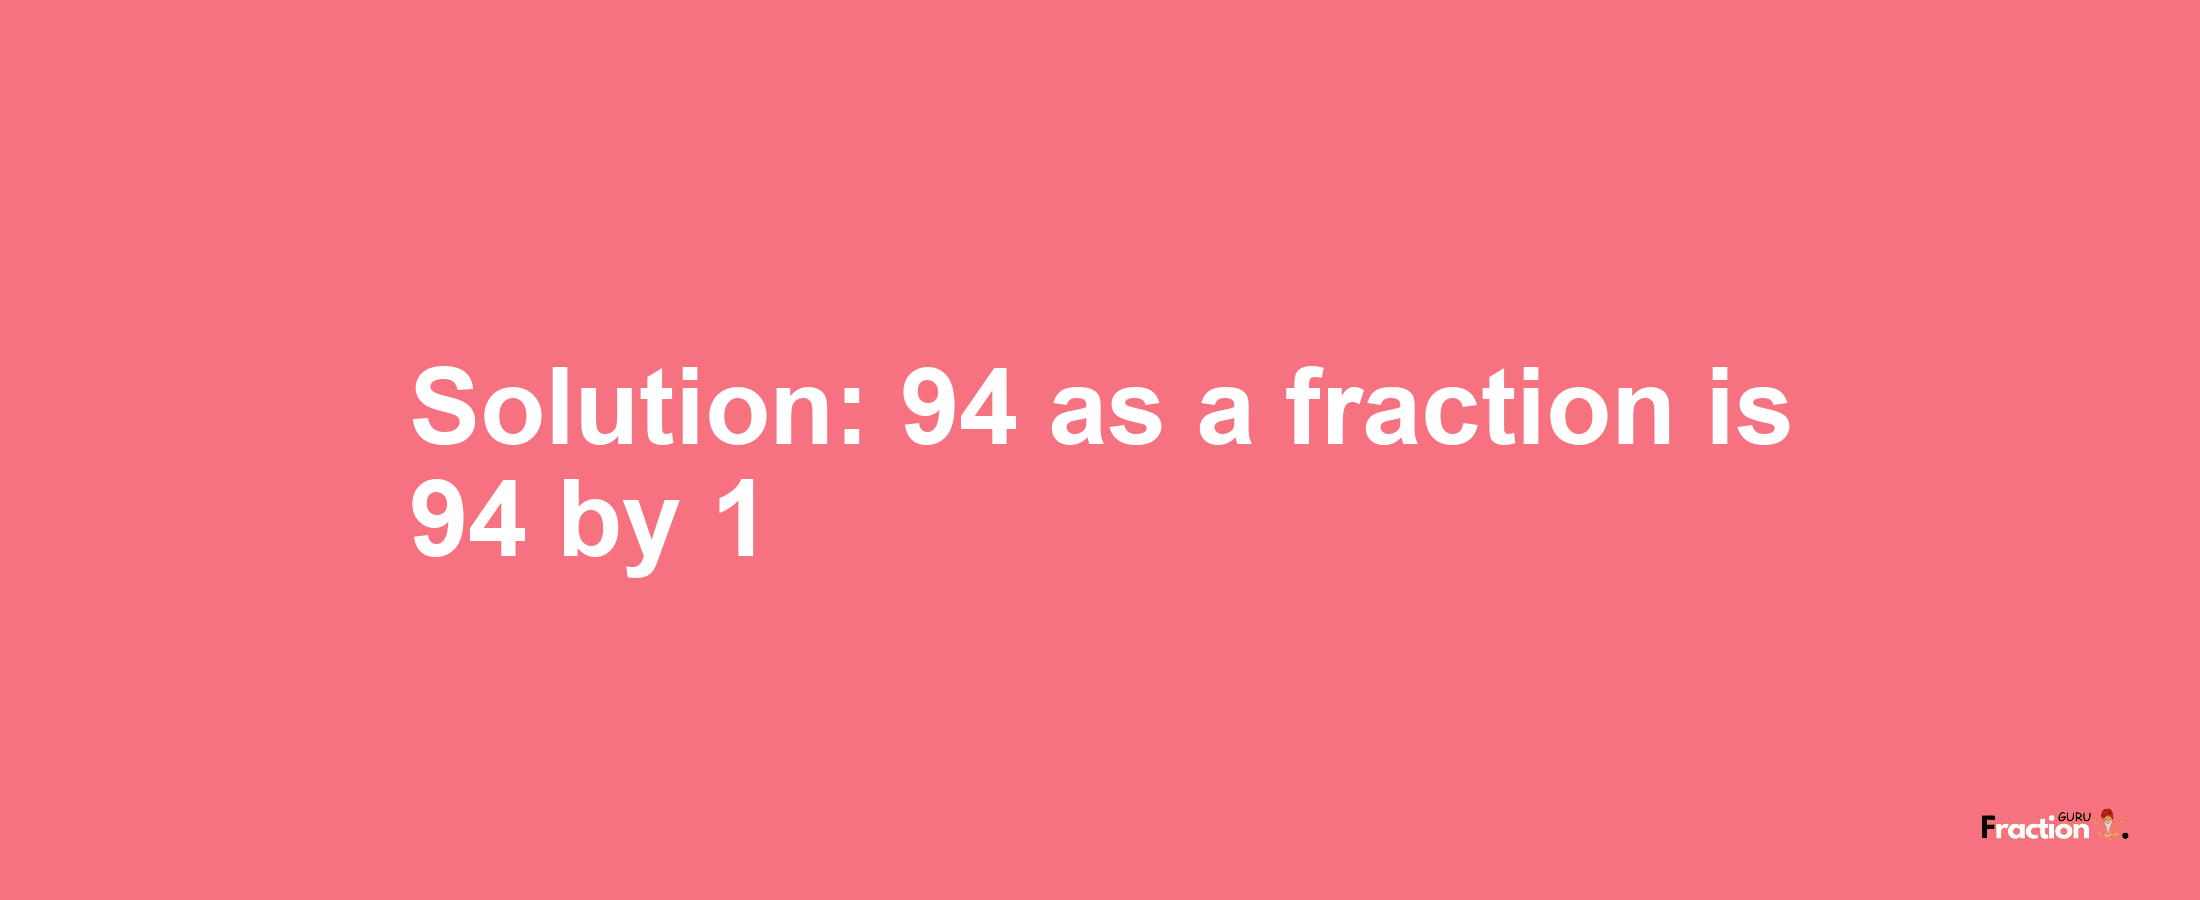 Solution:94 as a fraction is 94/1